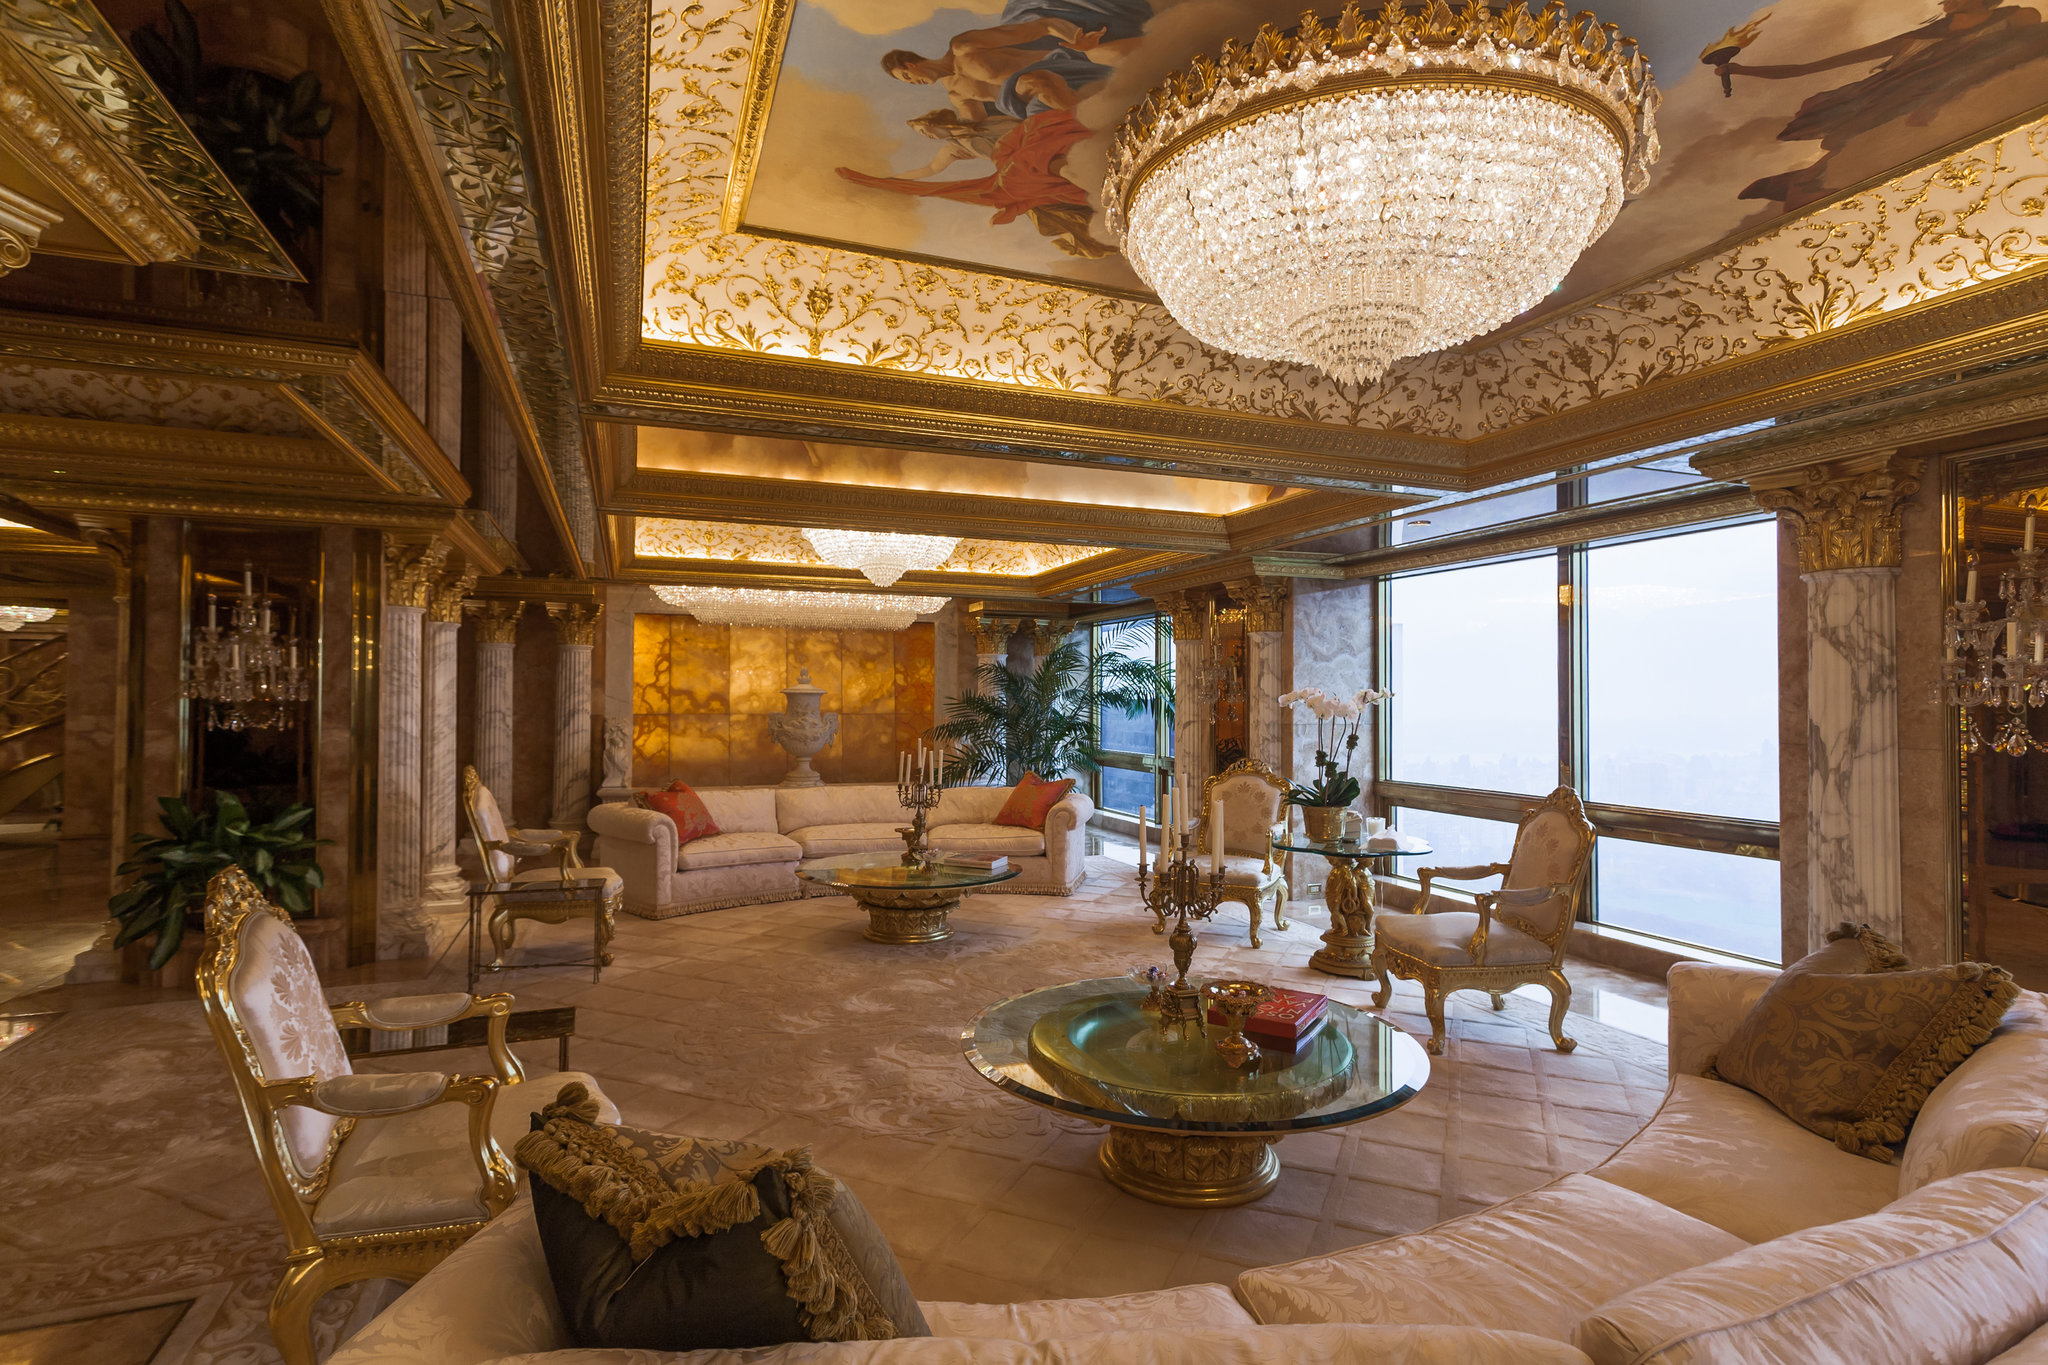 The Trump Tower penthouse in 2012. Photo: Sam Horine.